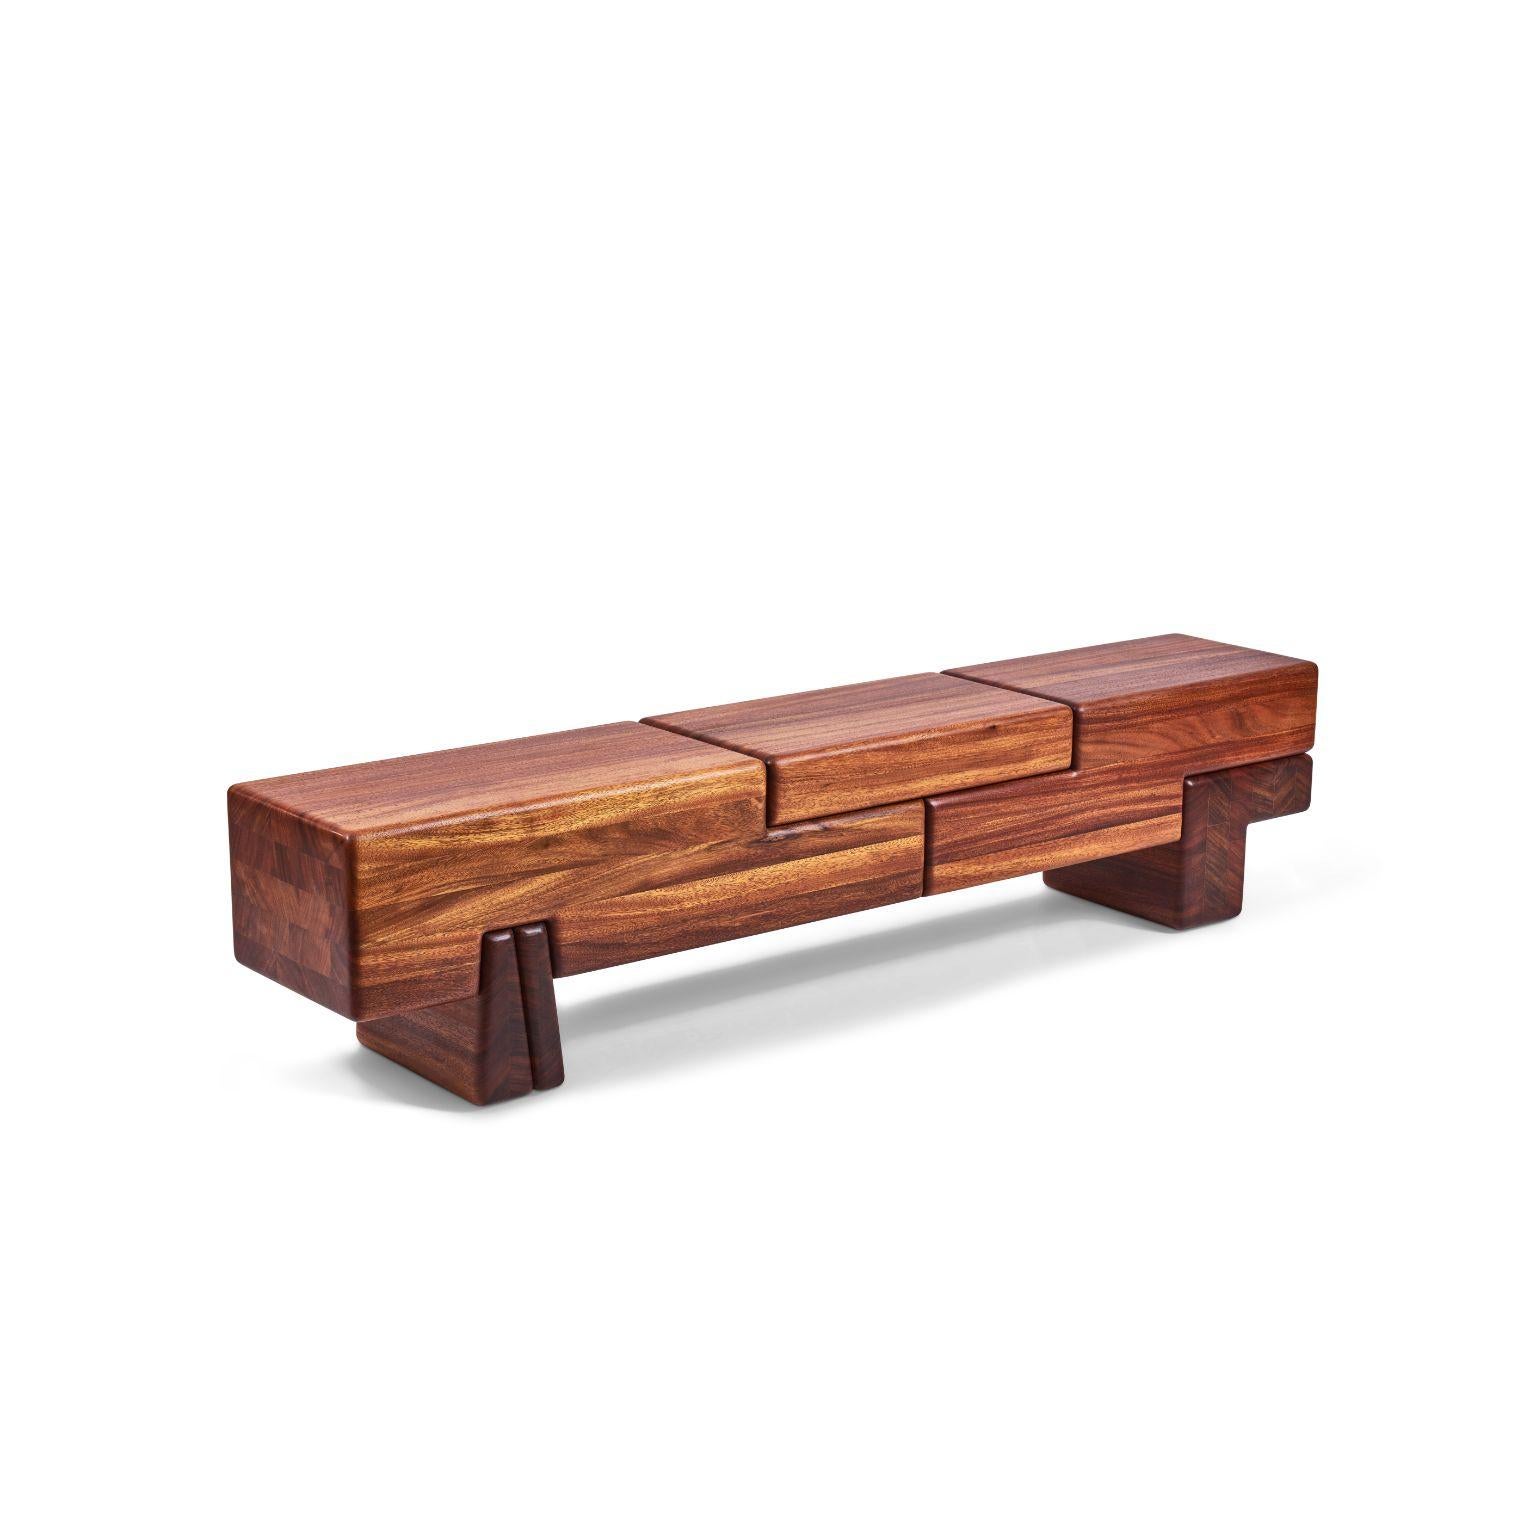 Post-Modern Okan D'arfique Laminated Bench by Contemporary Ecowood For Sale